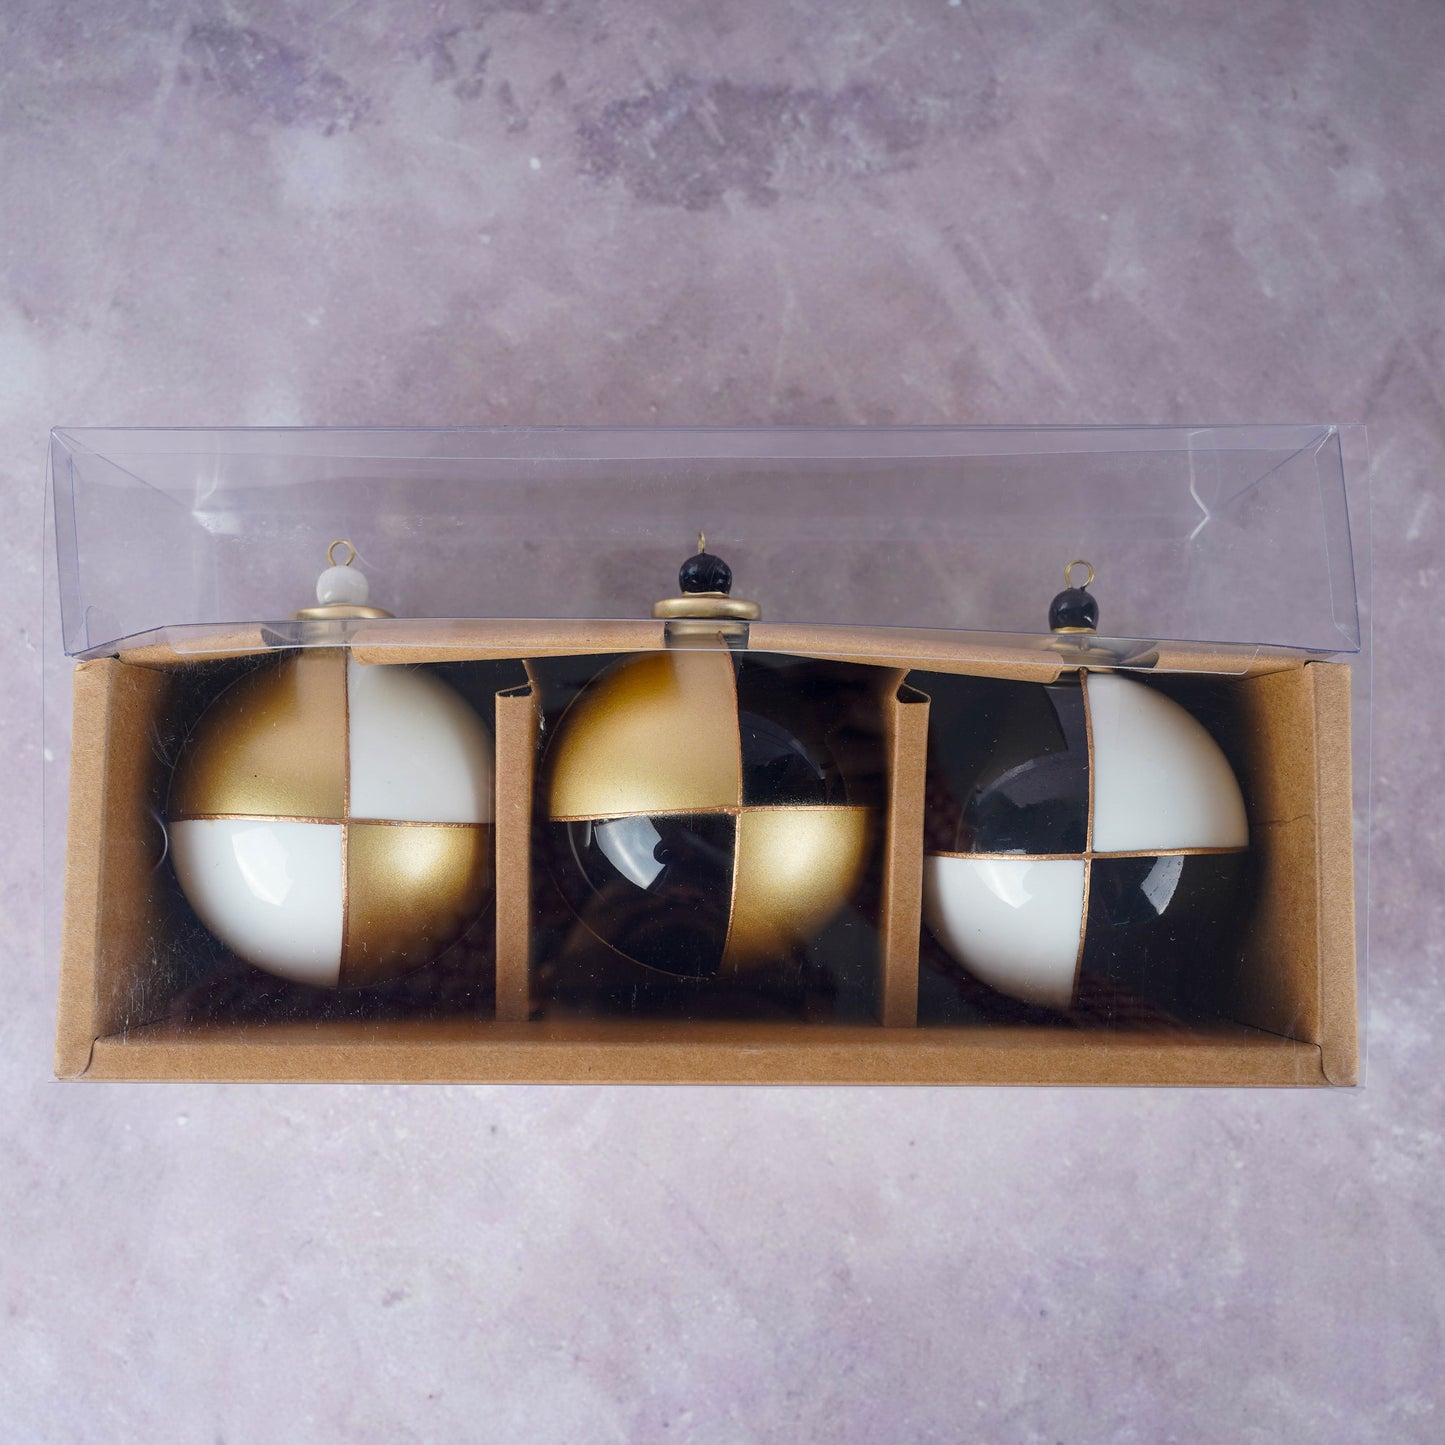 Black white and gold Christmas Ornaments